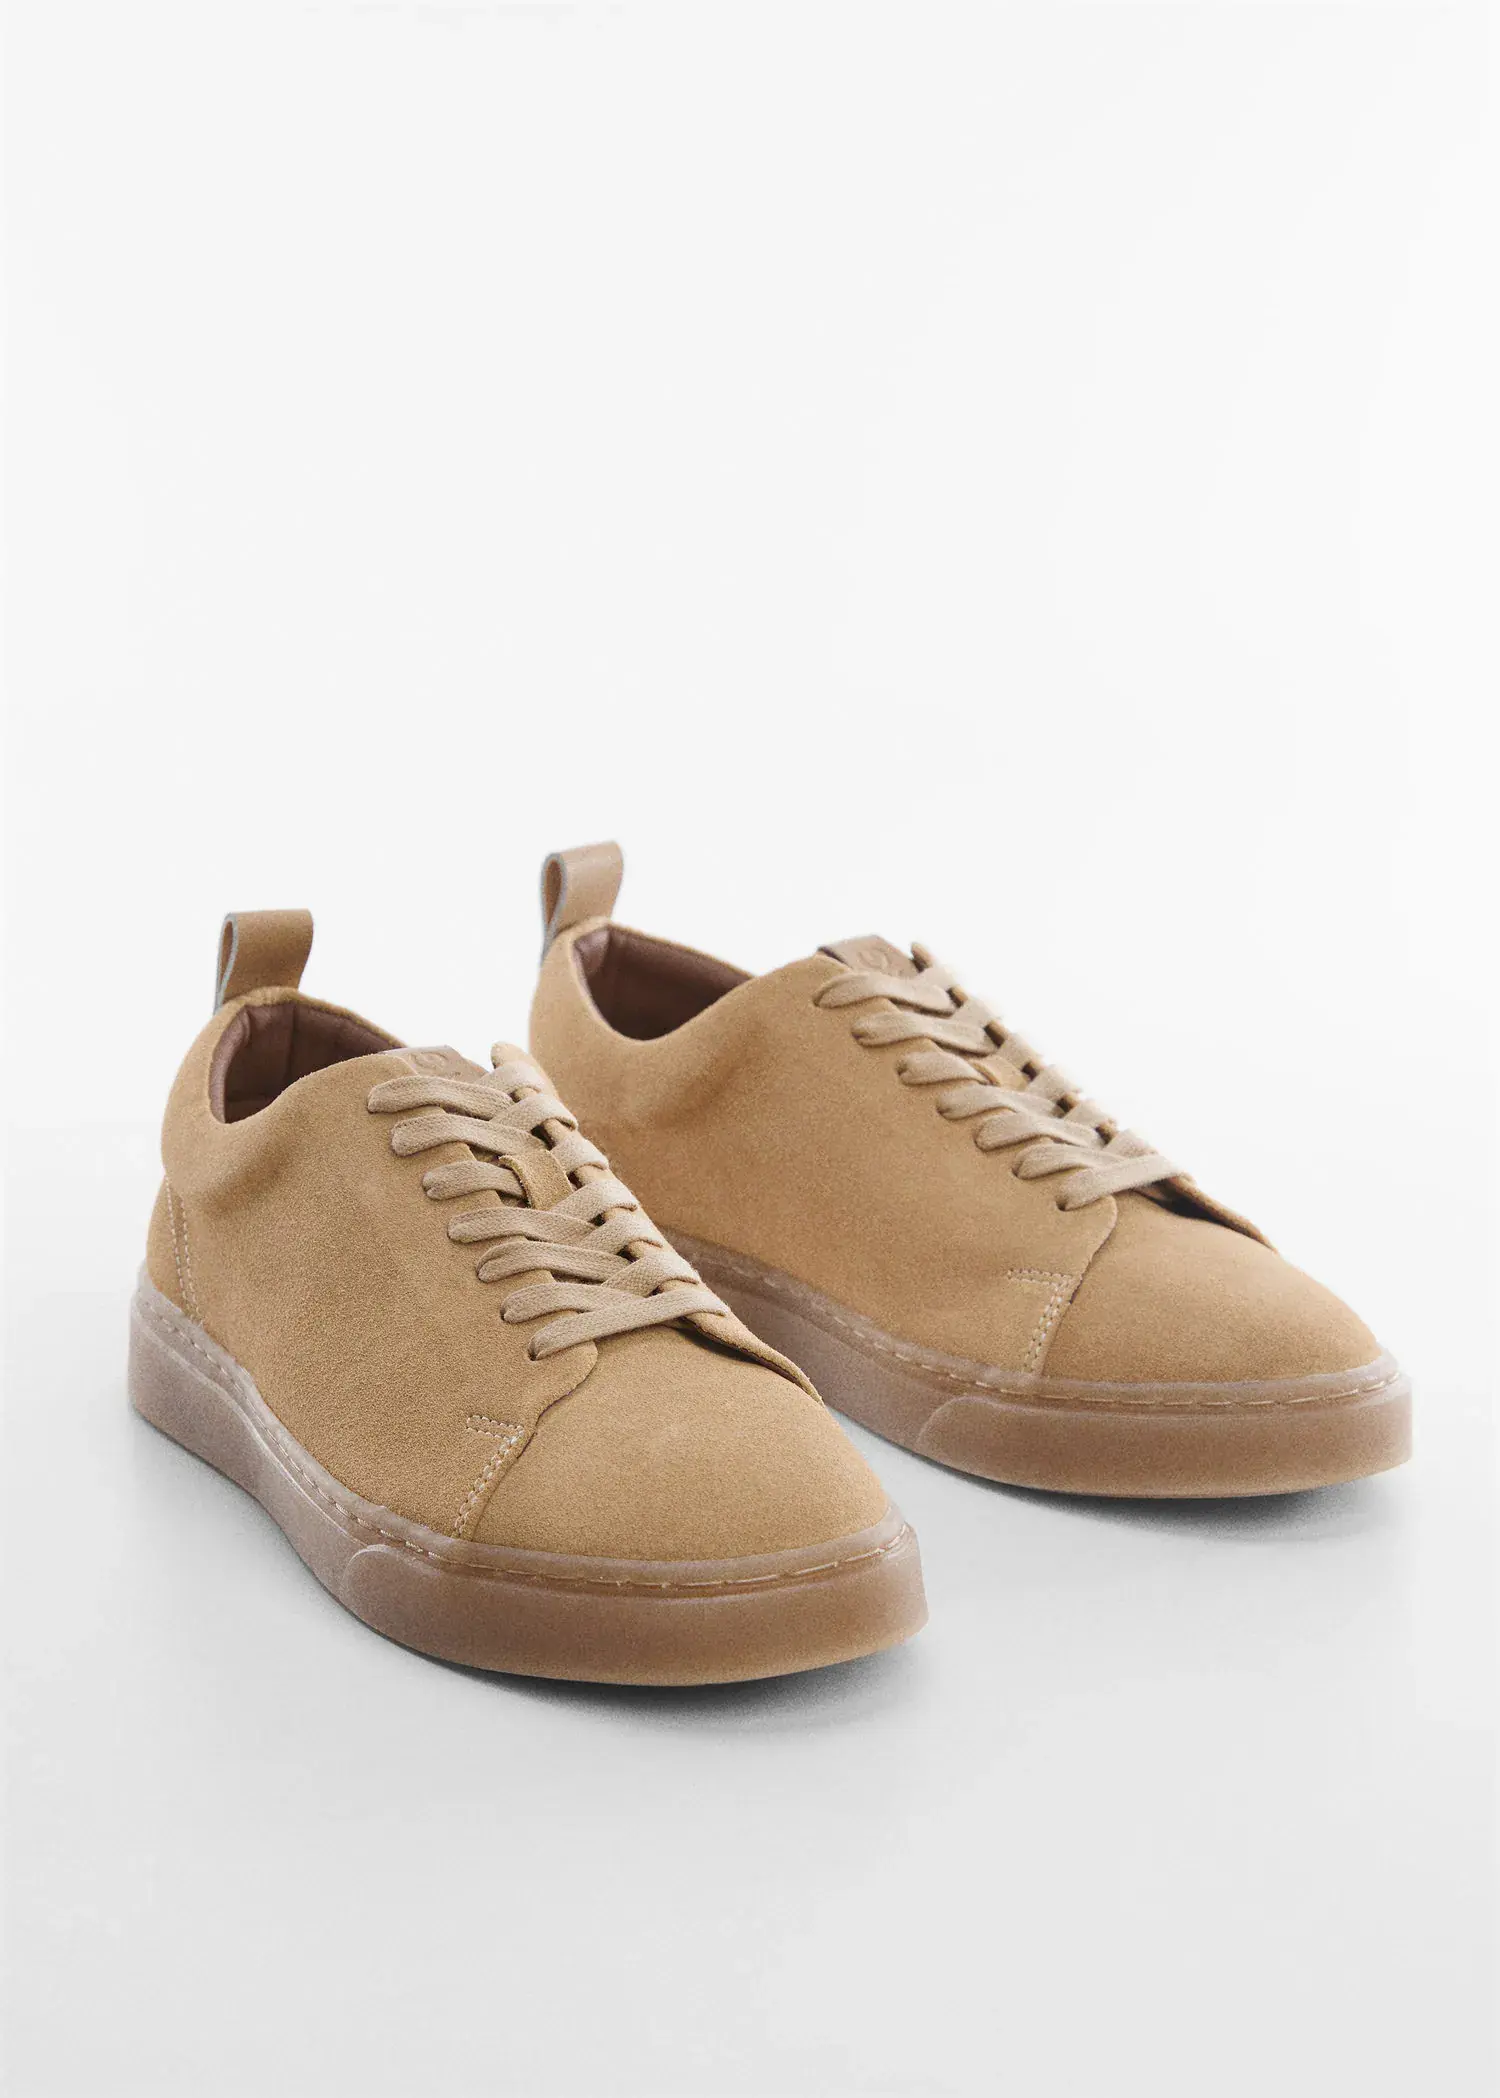 Mango Suede trainers. a pair of tan sneakers on a white surface. 